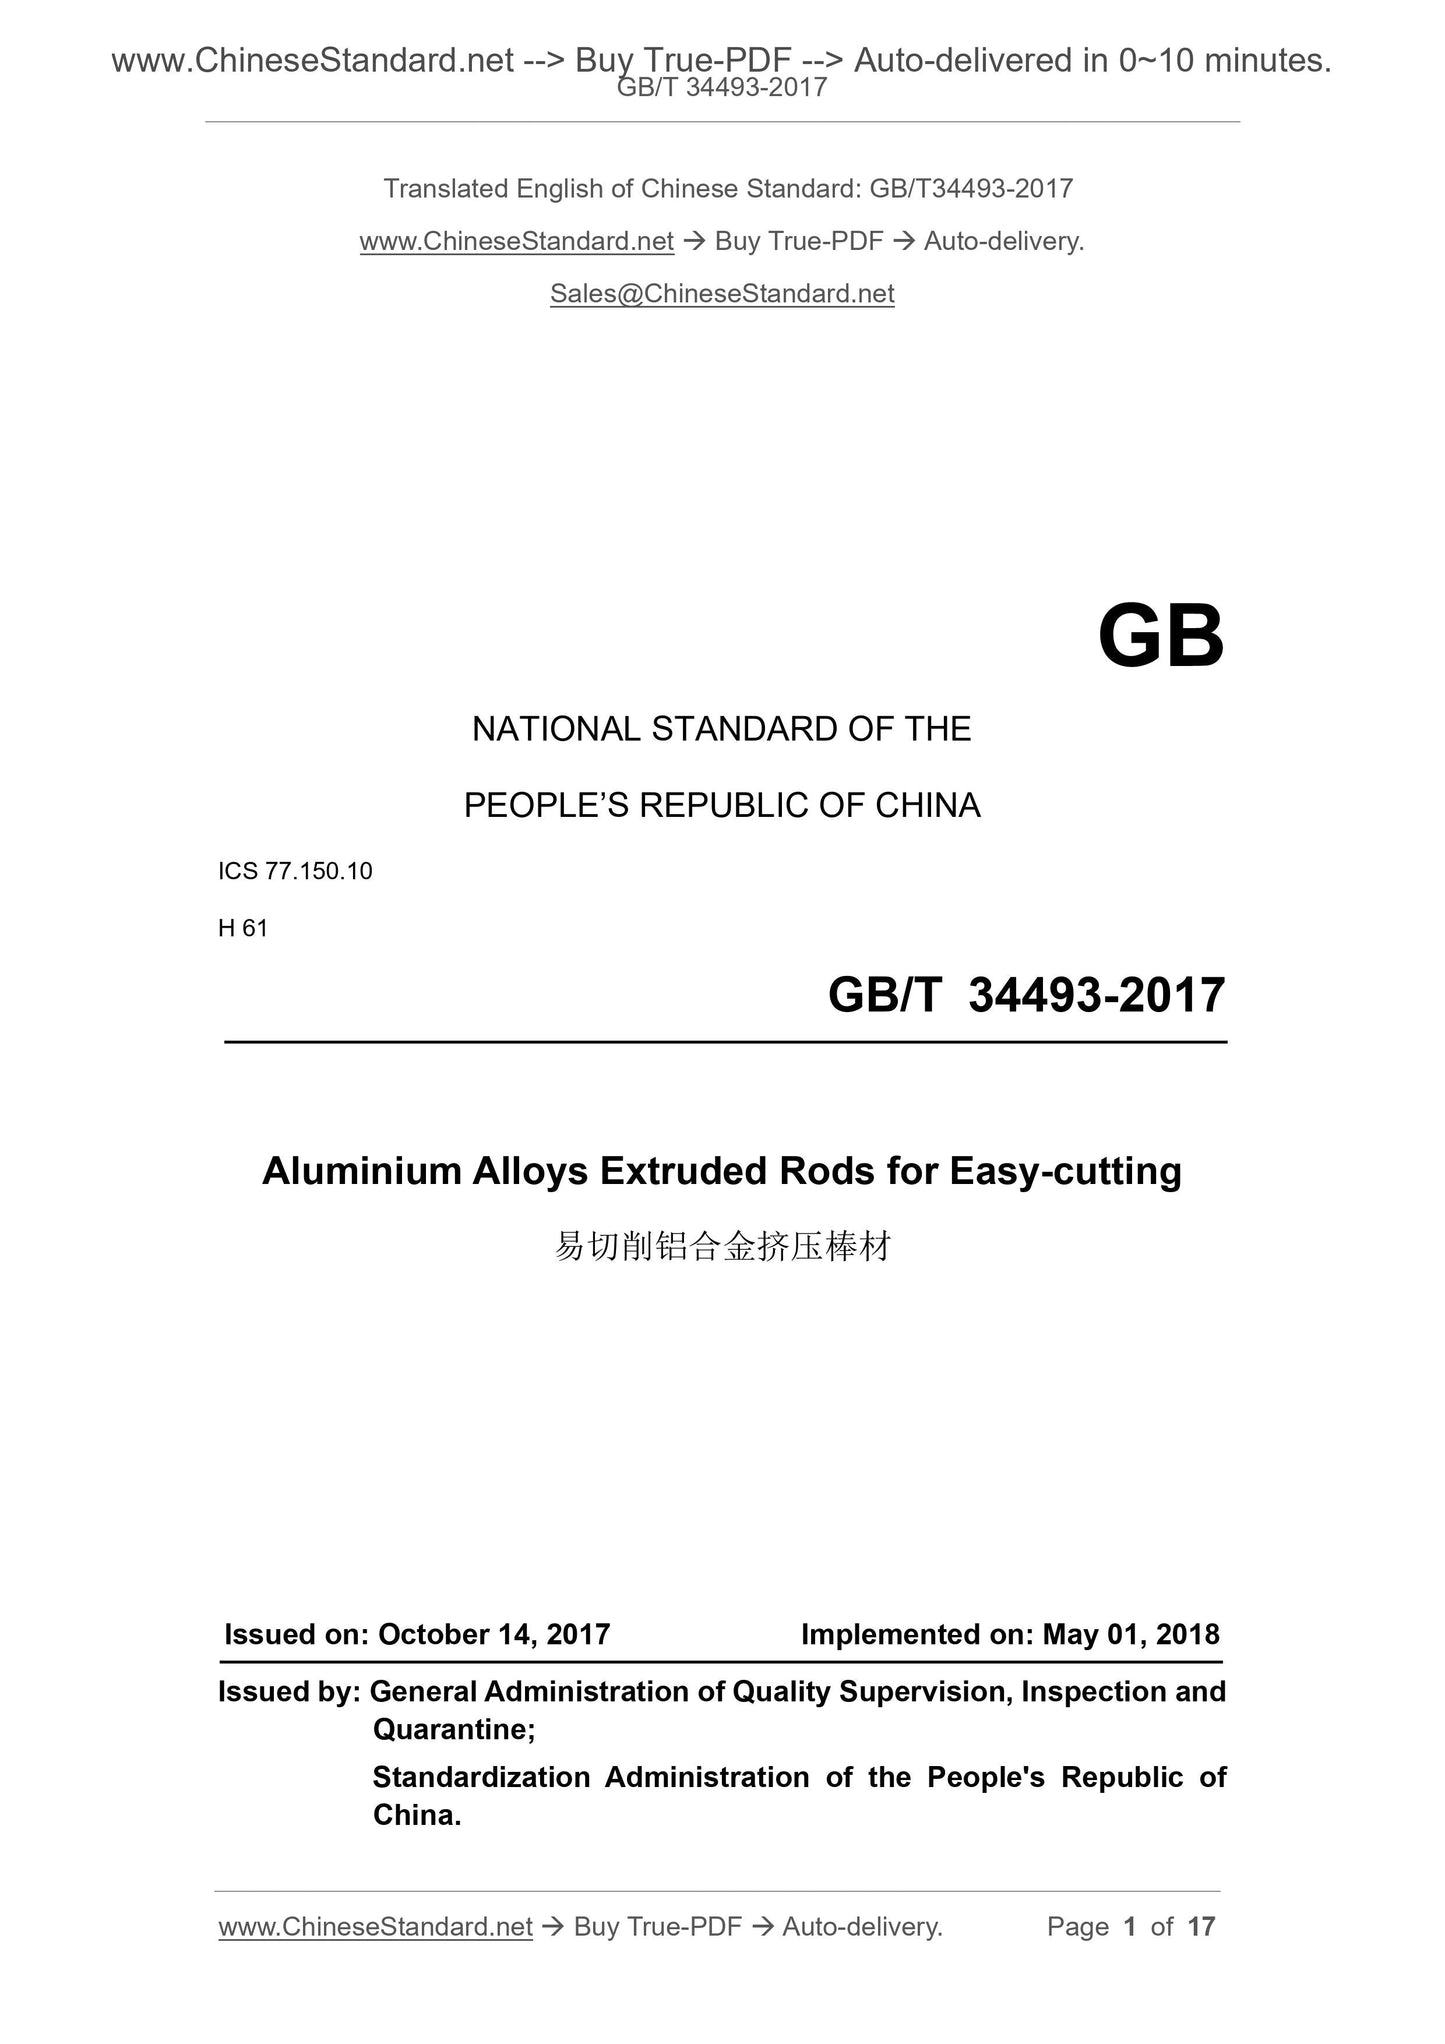 GB/T 34493-2017 Page 1